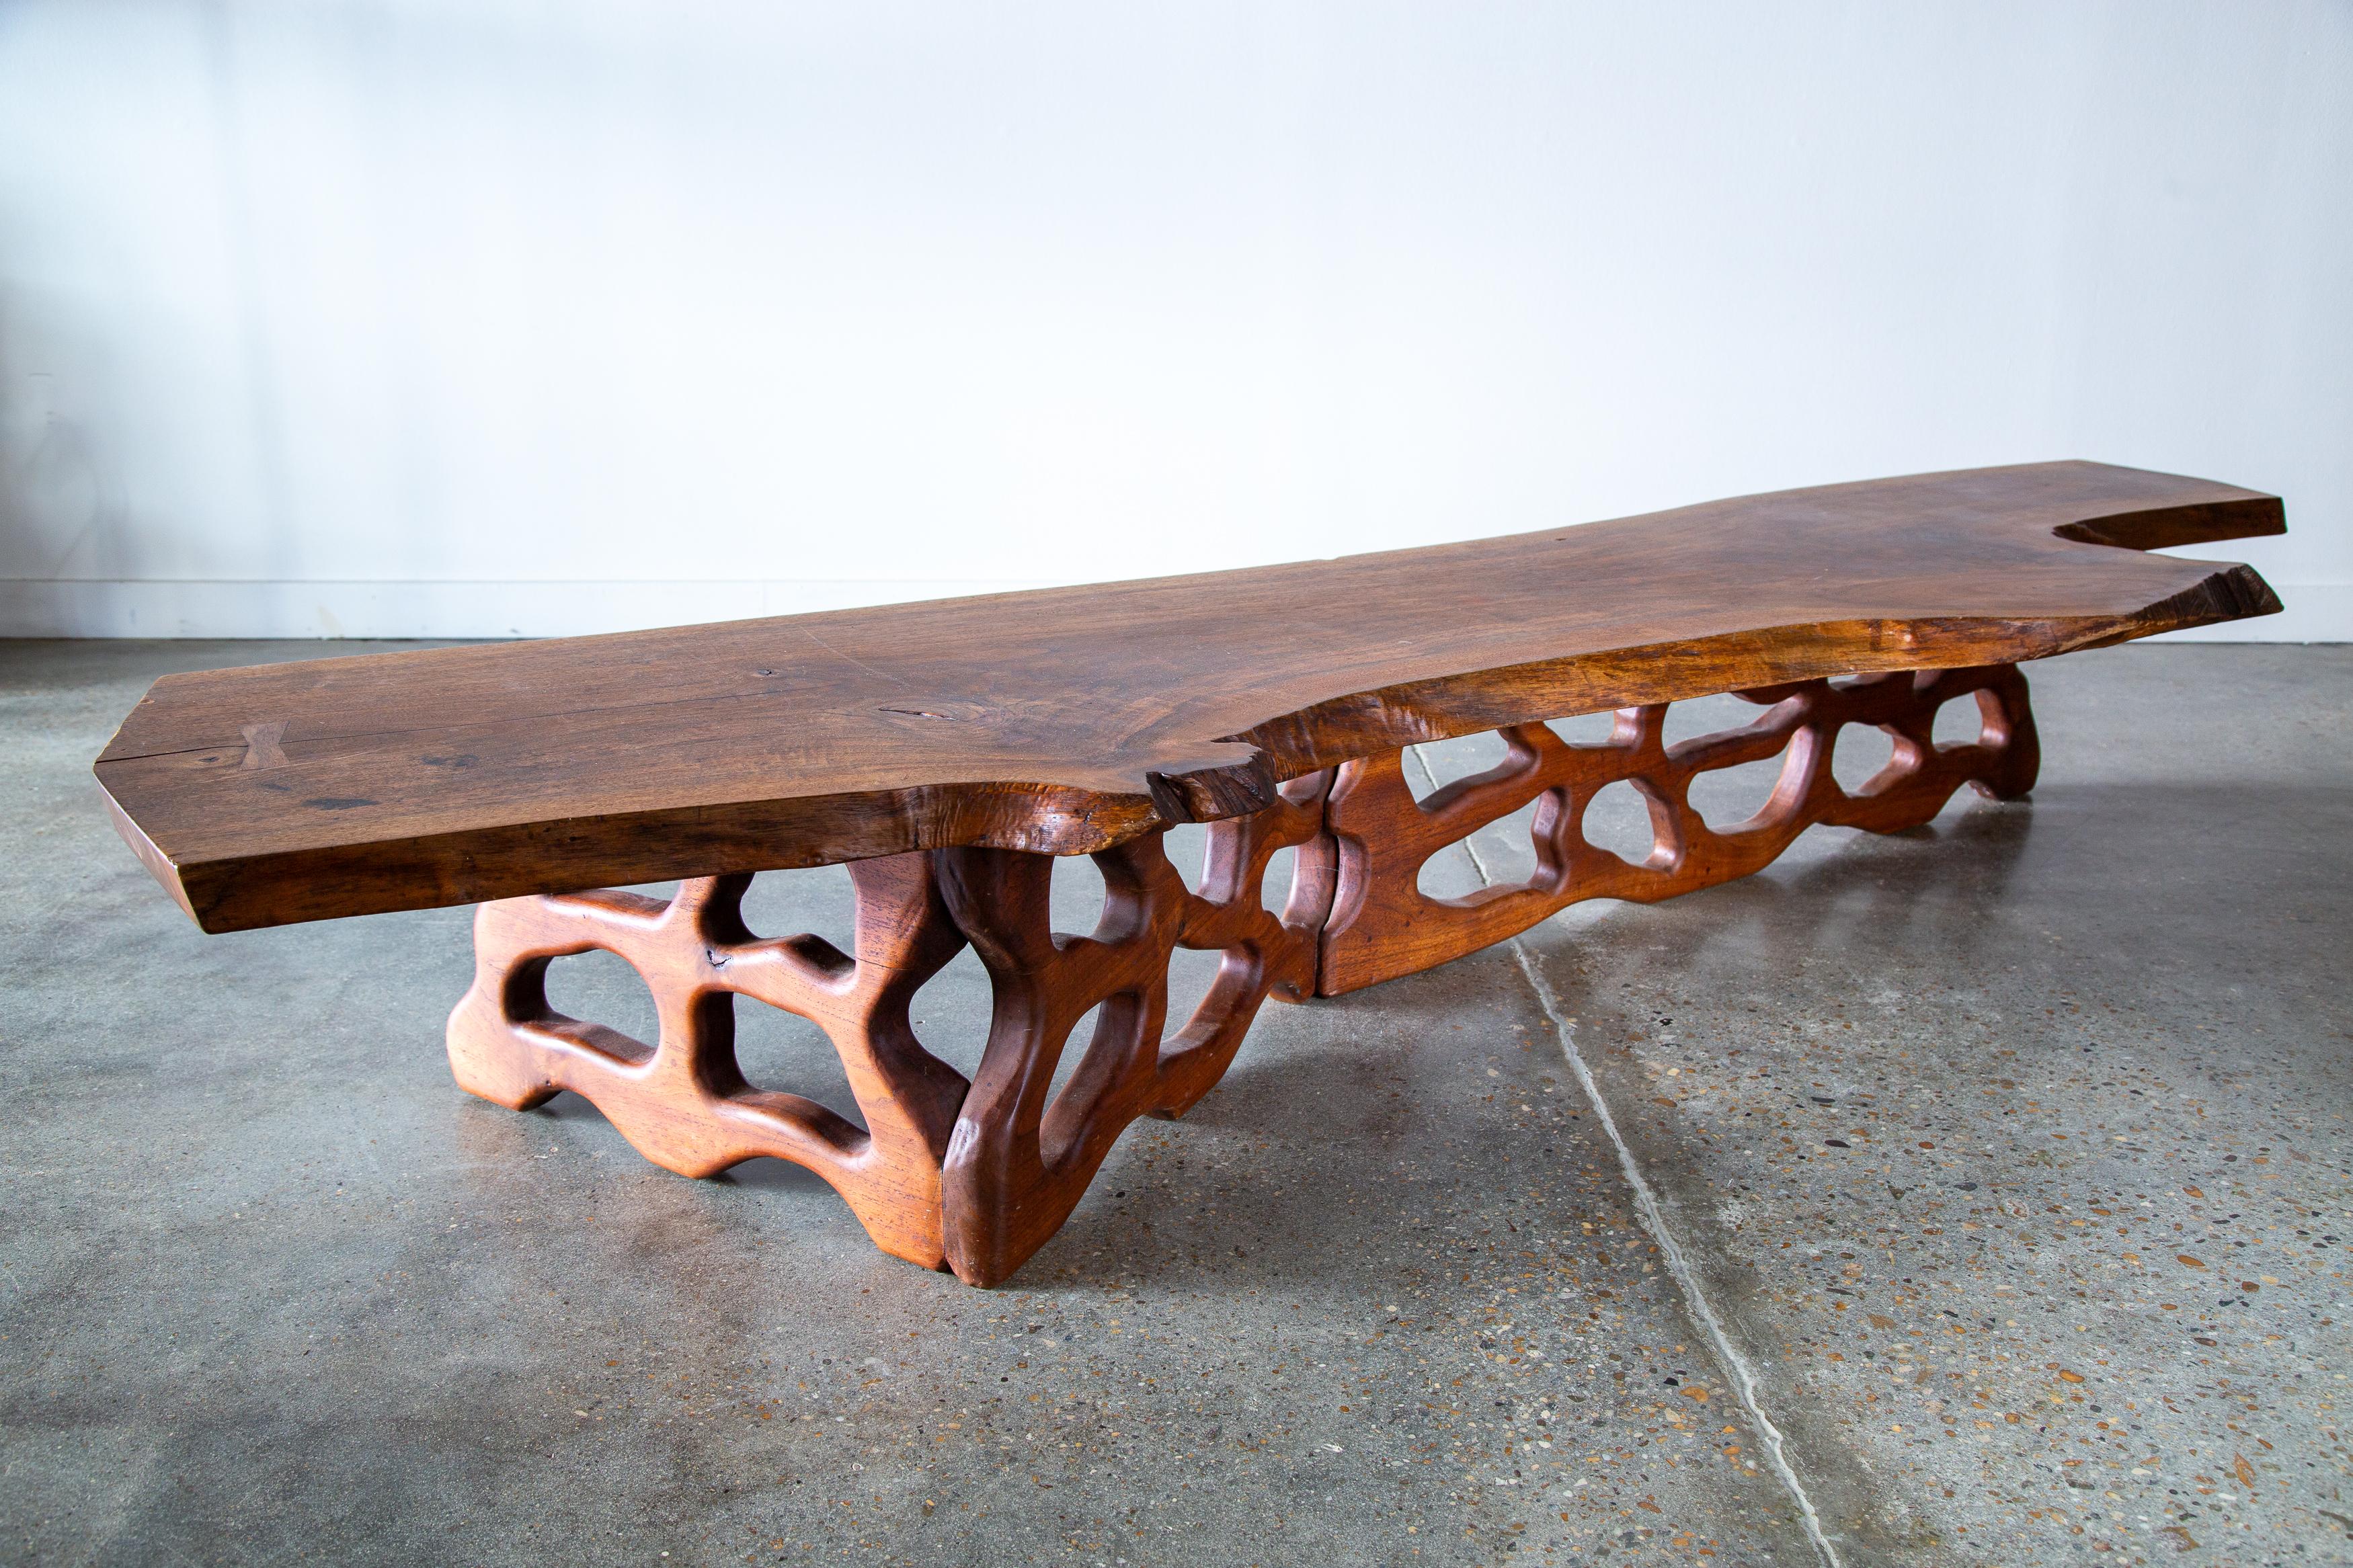 An almost 8’ long monumental live edge American Black walnut table designed and created by Gino Russo in 1972. The live edge table is elevated by an organic hand carved form that emulates a coral reef.  Rosewood butterfly keys stabilize natural